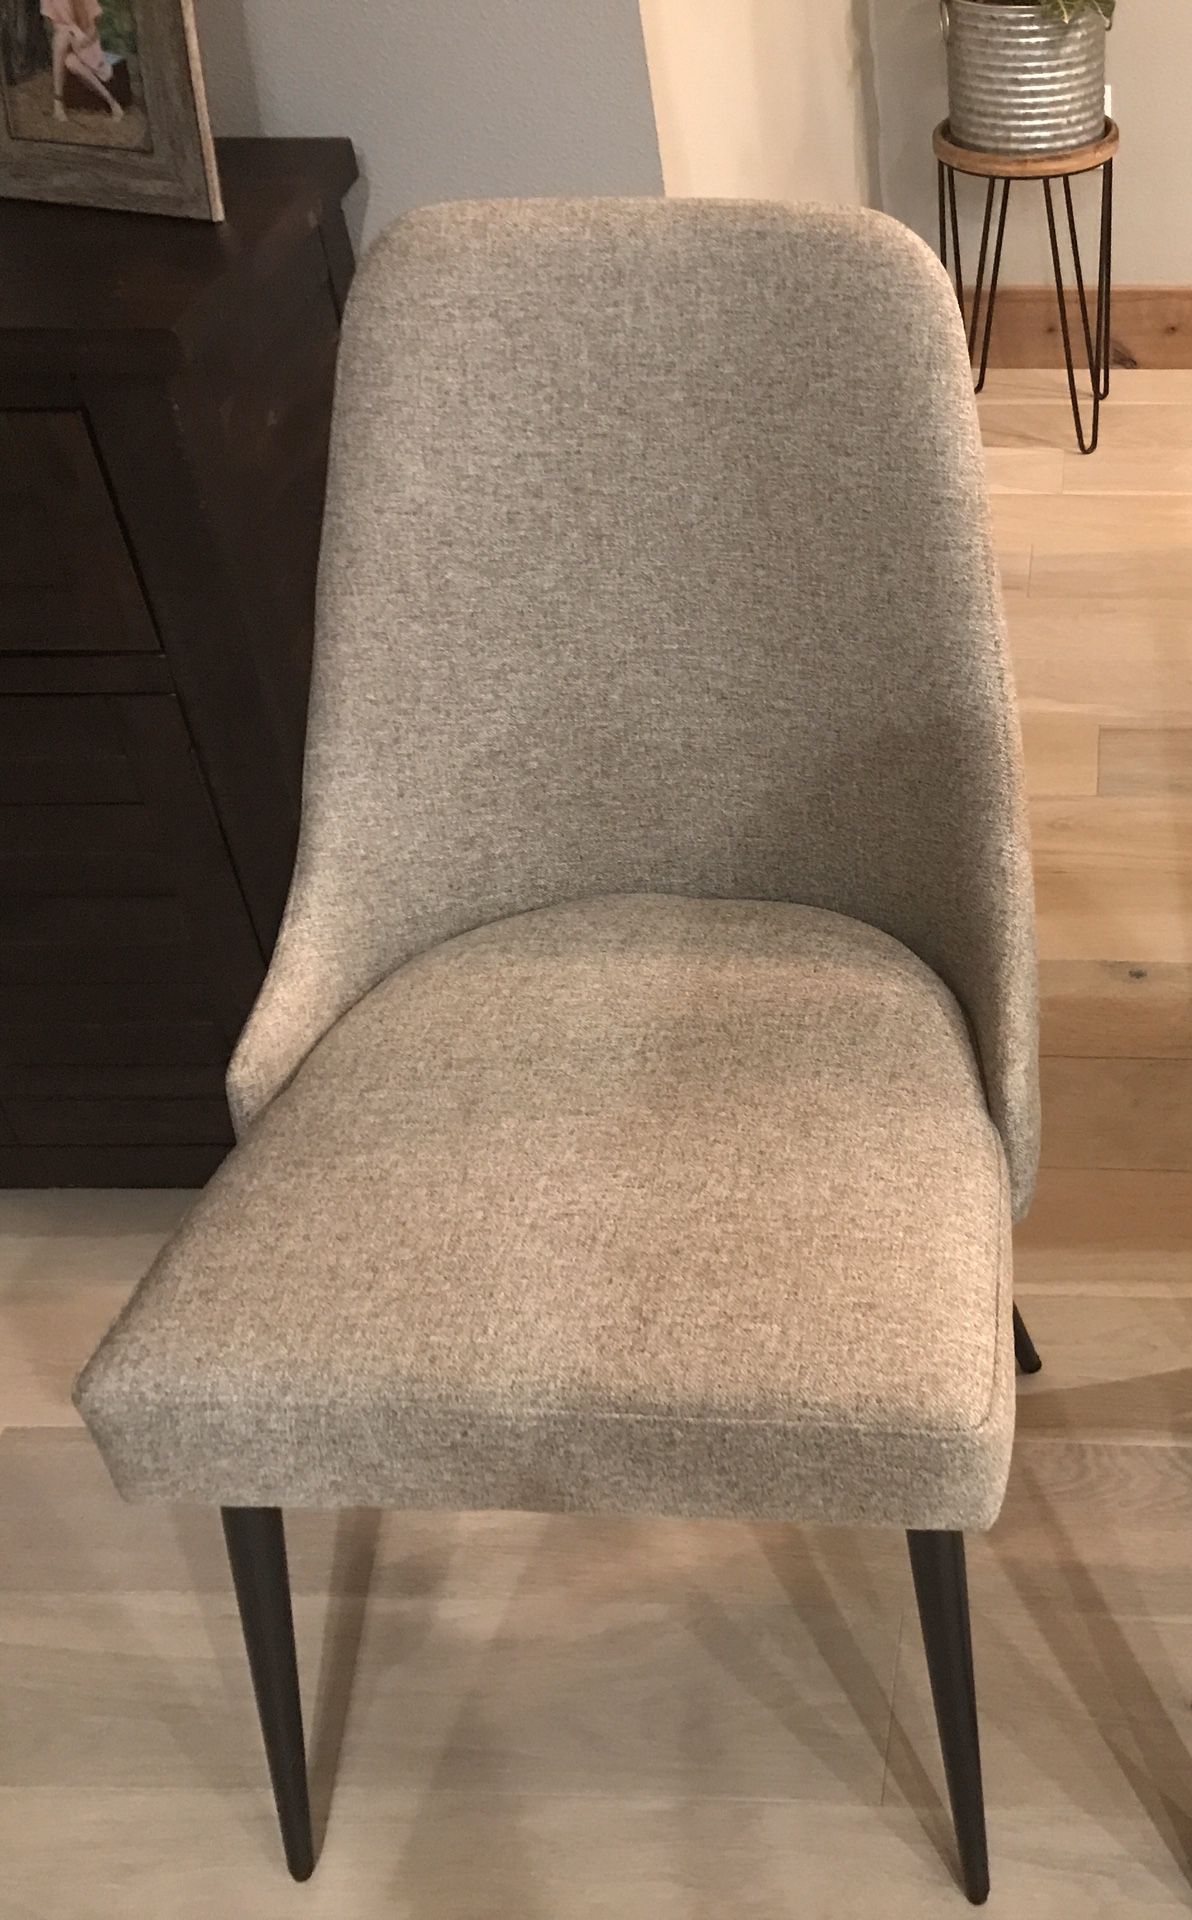 New Pier 1 Dining Chairs